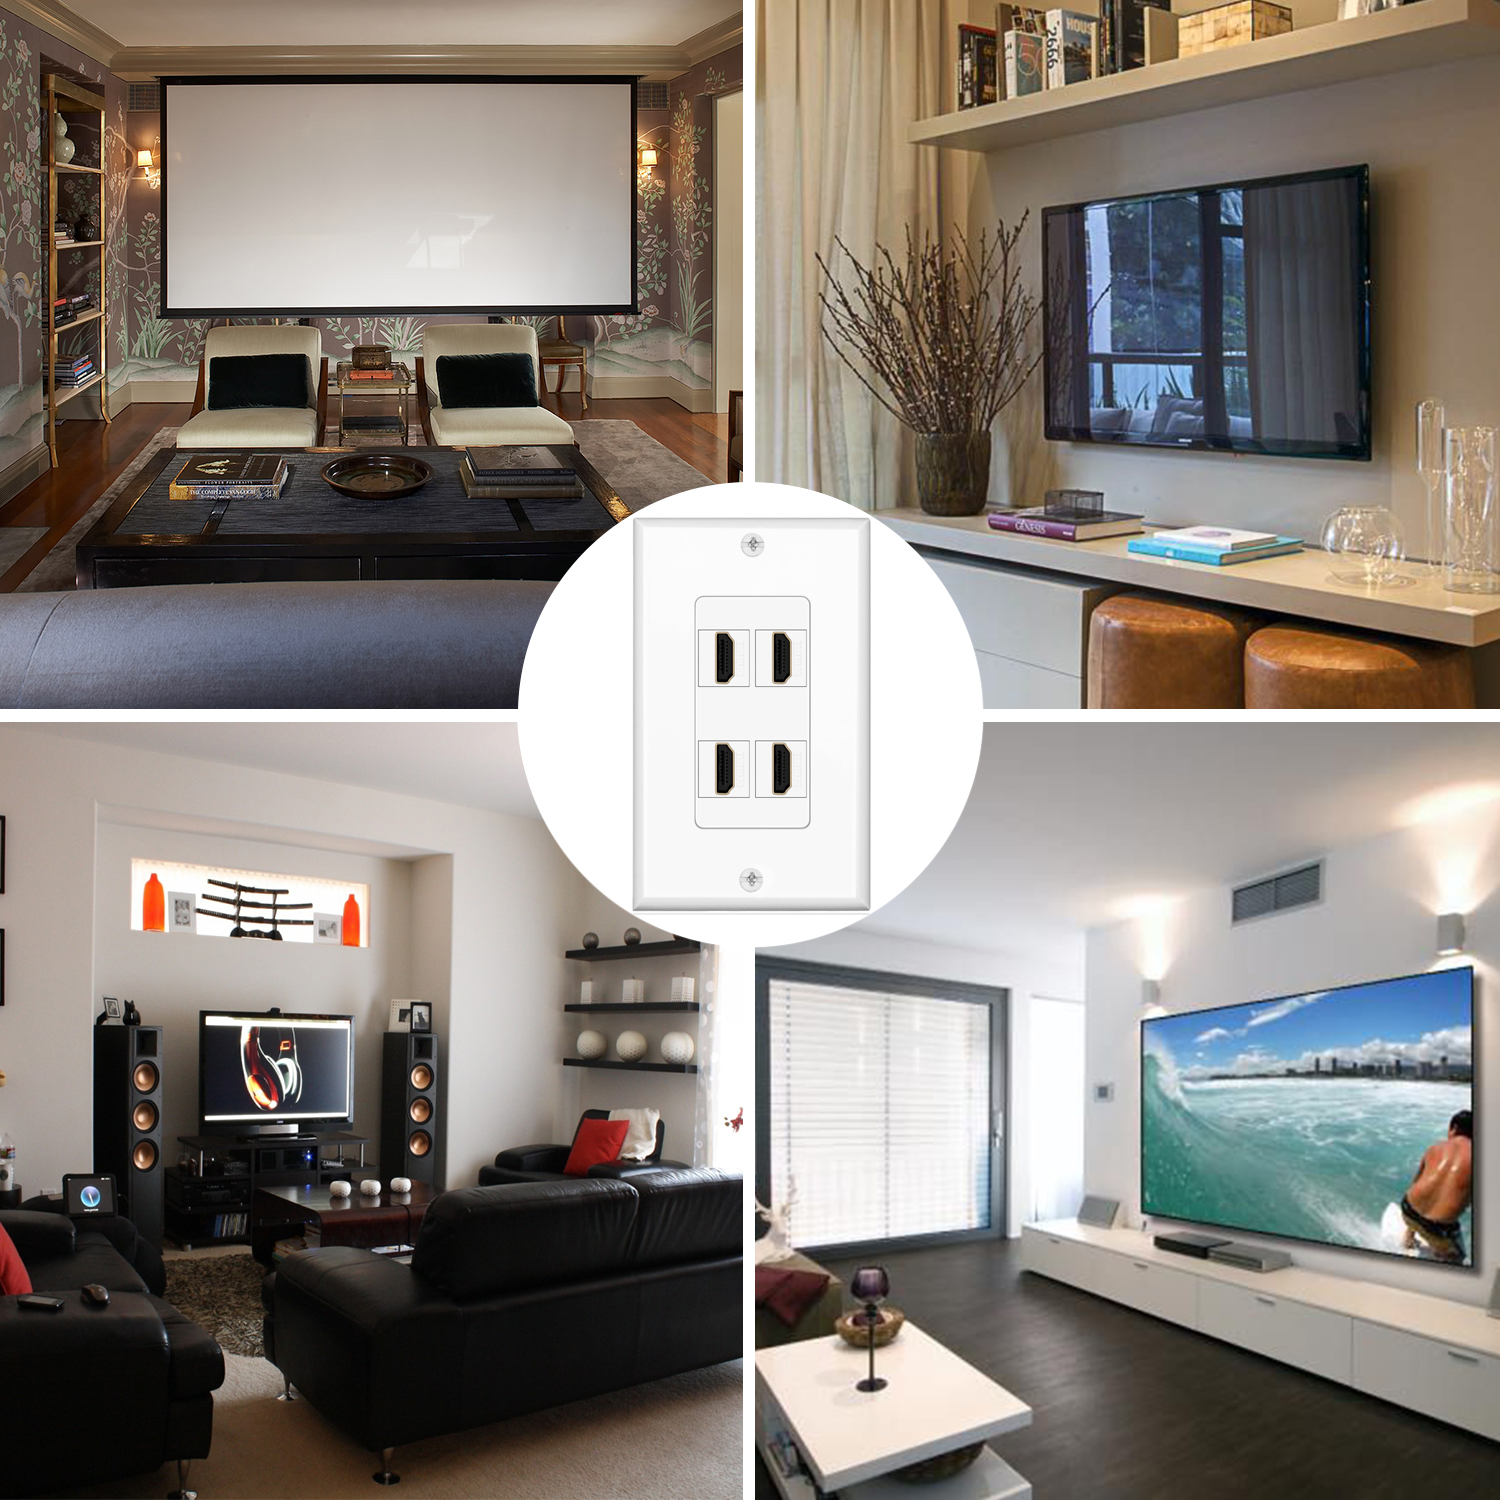 Two-Piece 4K HDMI Wall Outlet - Included faceplate and HDMI insert makes connecting the cables easier; Simple installation of HDMI wall plate 4 port insert with the included mounting screws